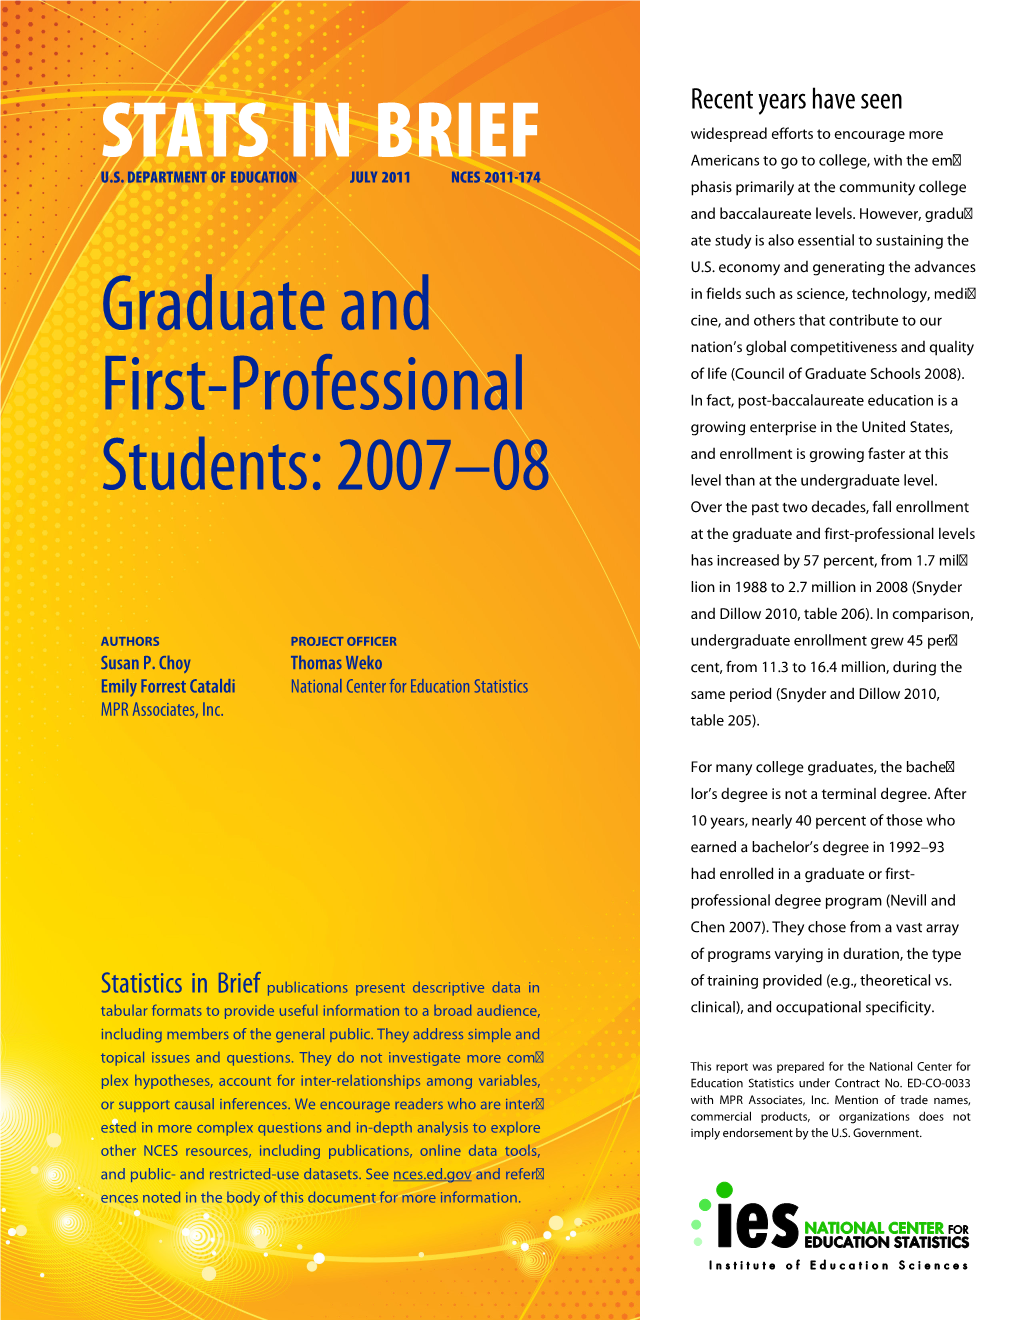 Graduate and First-Professional Students: 2007–08 Working on a Master’S Degree (Figure 1)